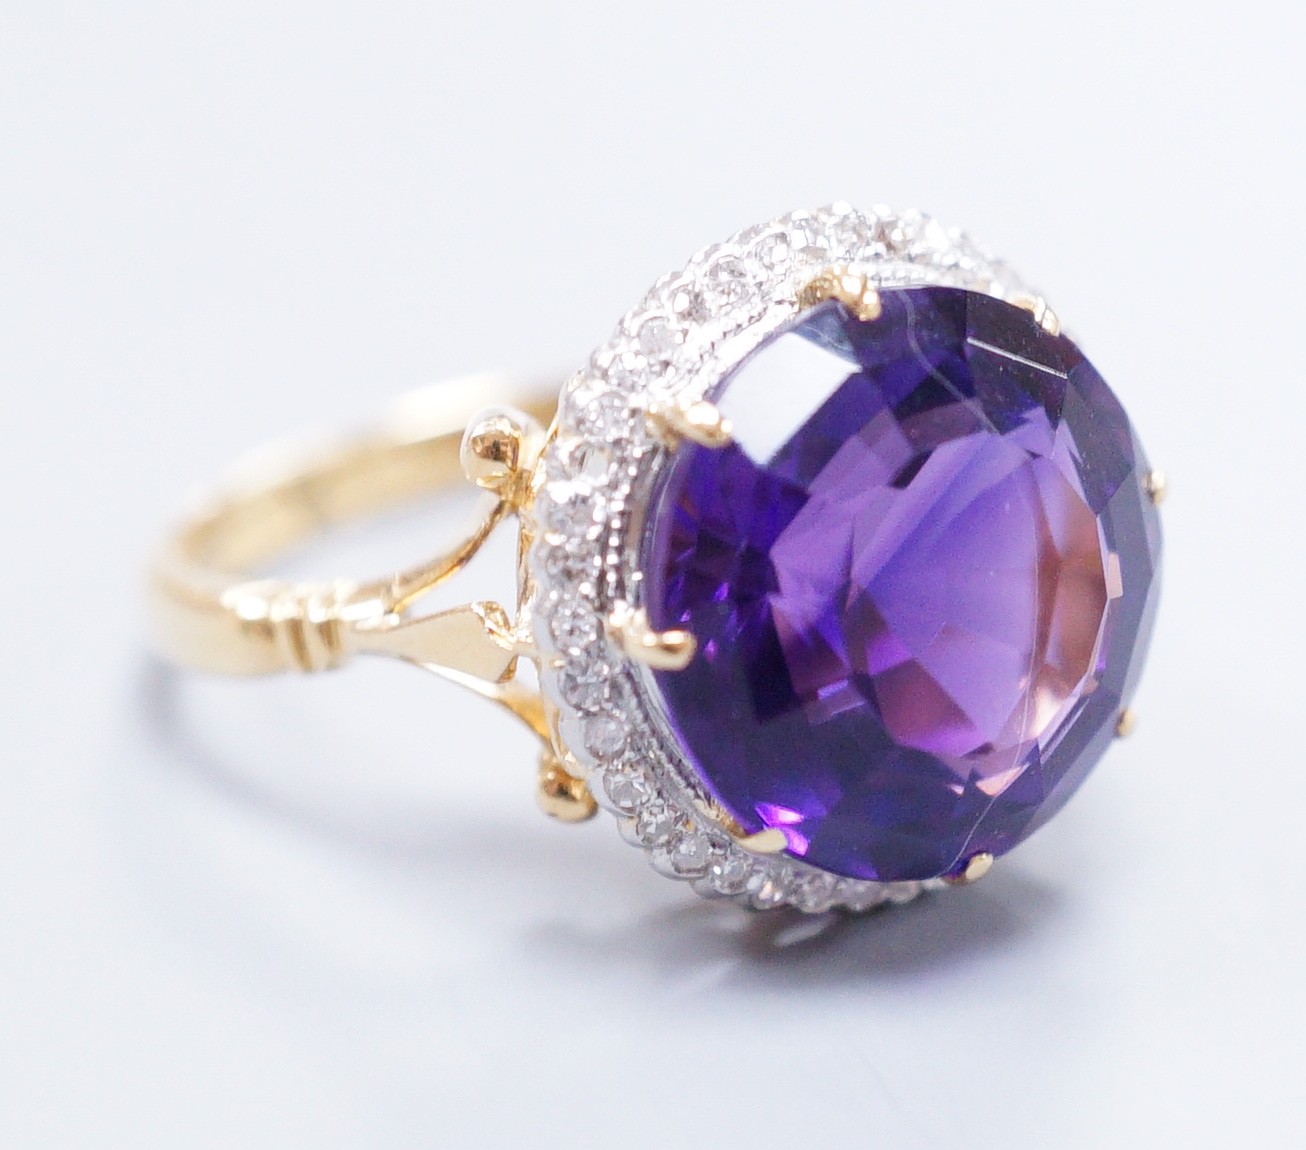 An 18ct gold and platinum, amethyst and diamond circular cluster ring, size M, gross 5.7 grams